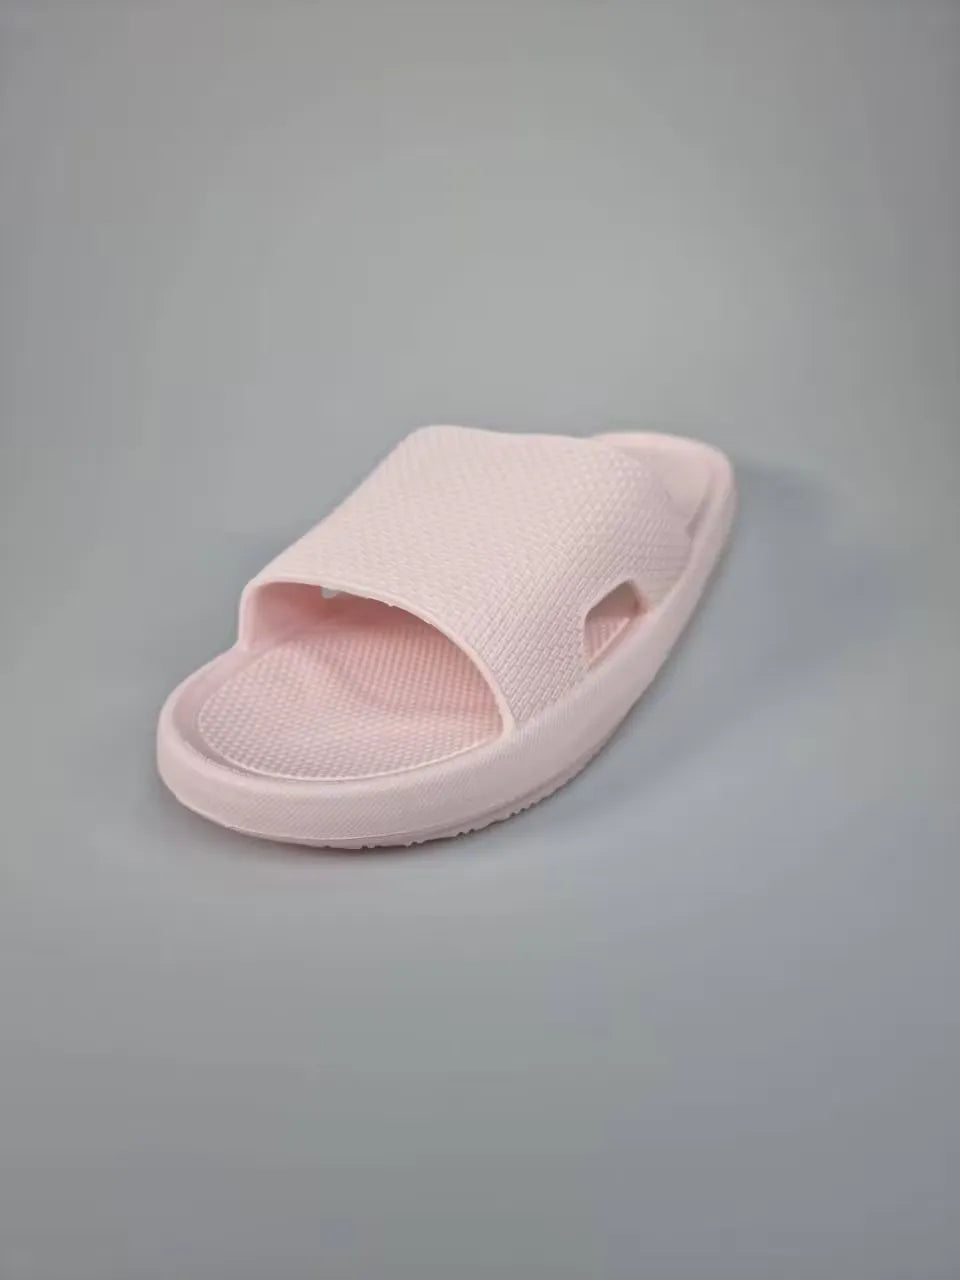 Light pink Summar slippers for women, featuring a plush memory foam footbed and flexible sole. Ideal for indoor and outdoor comfort.